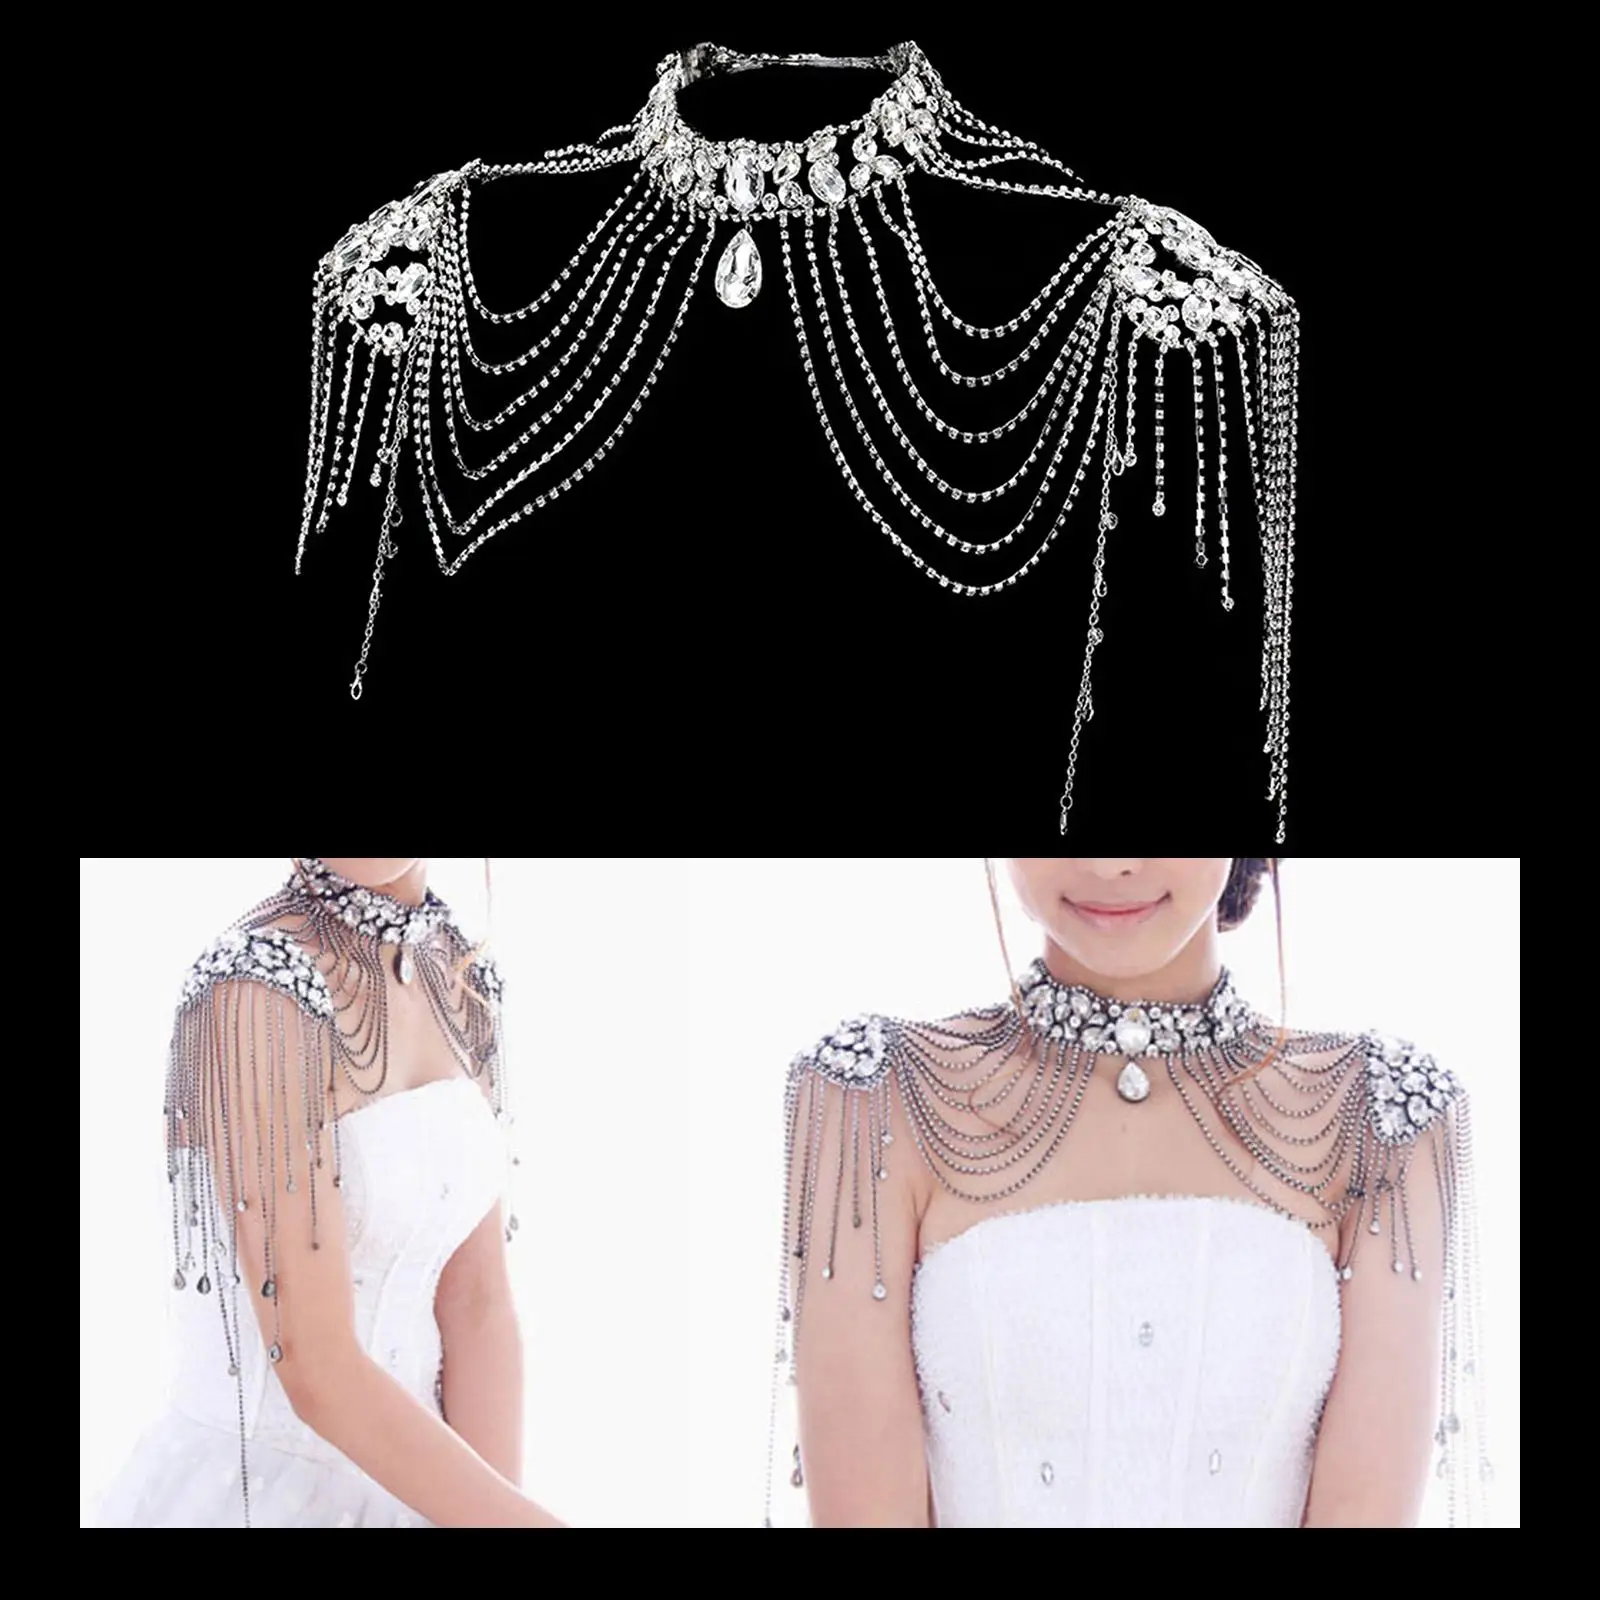 1 Piece Shoulder Chain Necklace Swimsuit Body Adjustable for Party Wedding